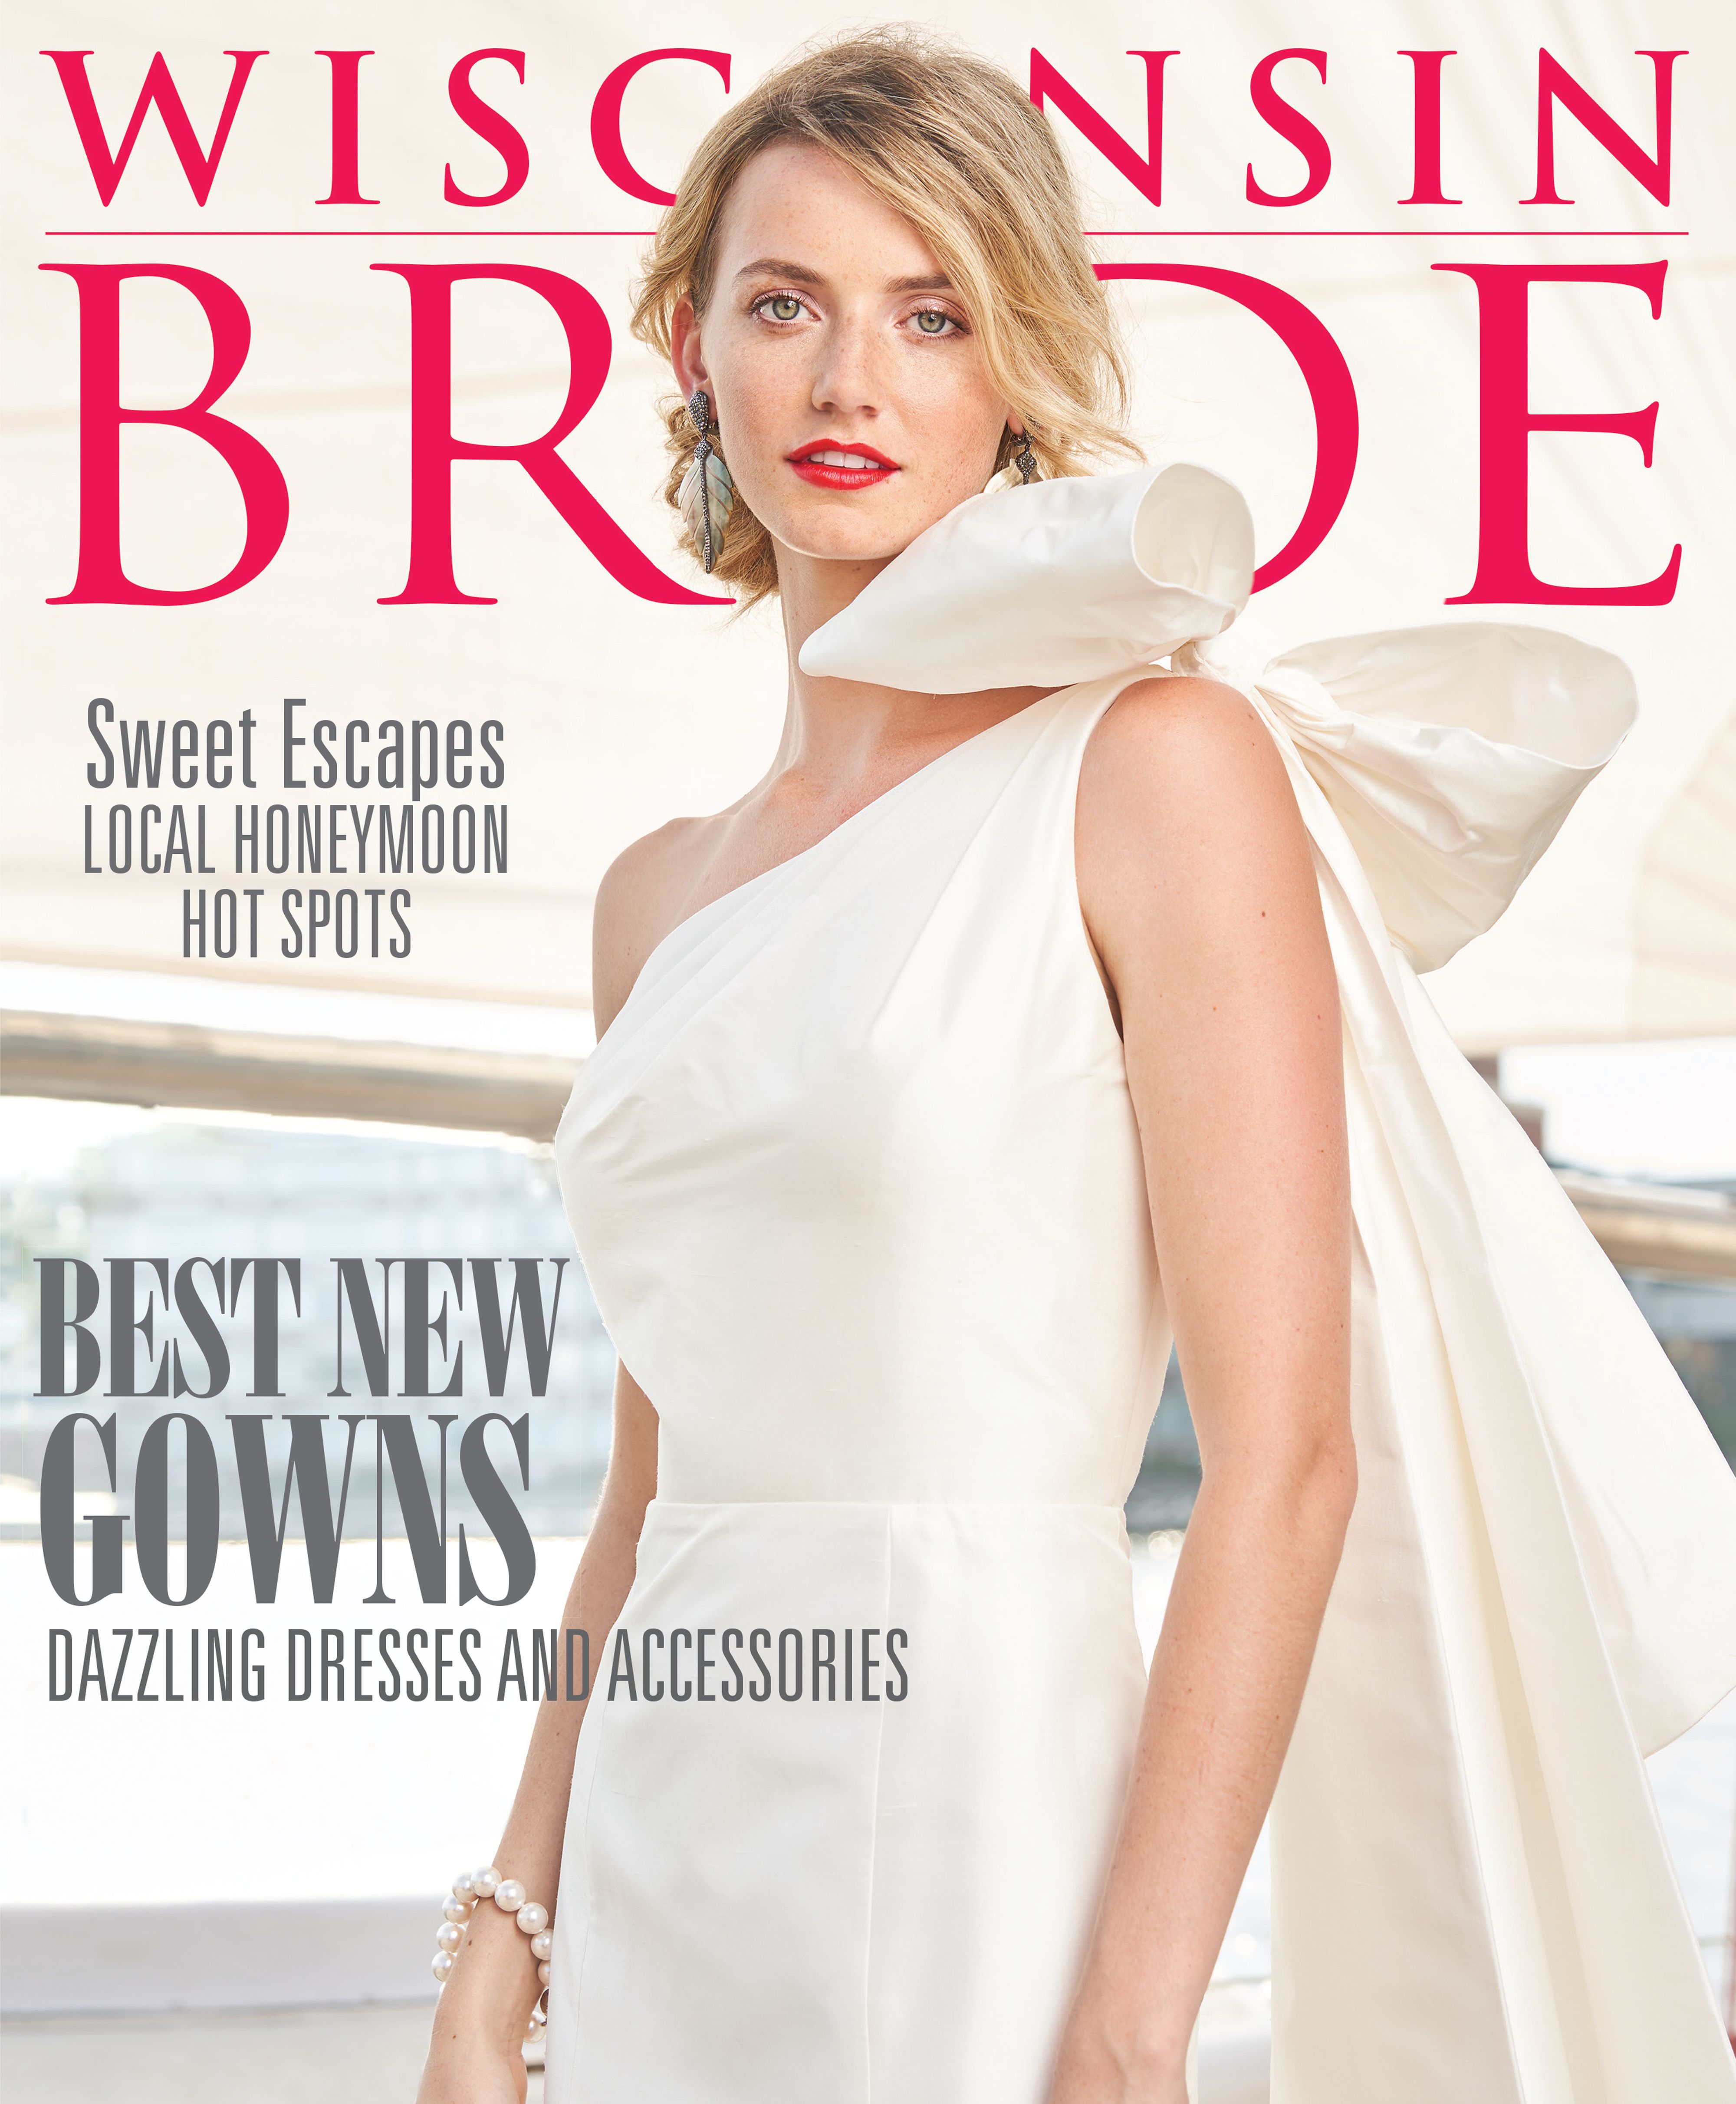 Wisconsin Bride Best New Gowns Cover